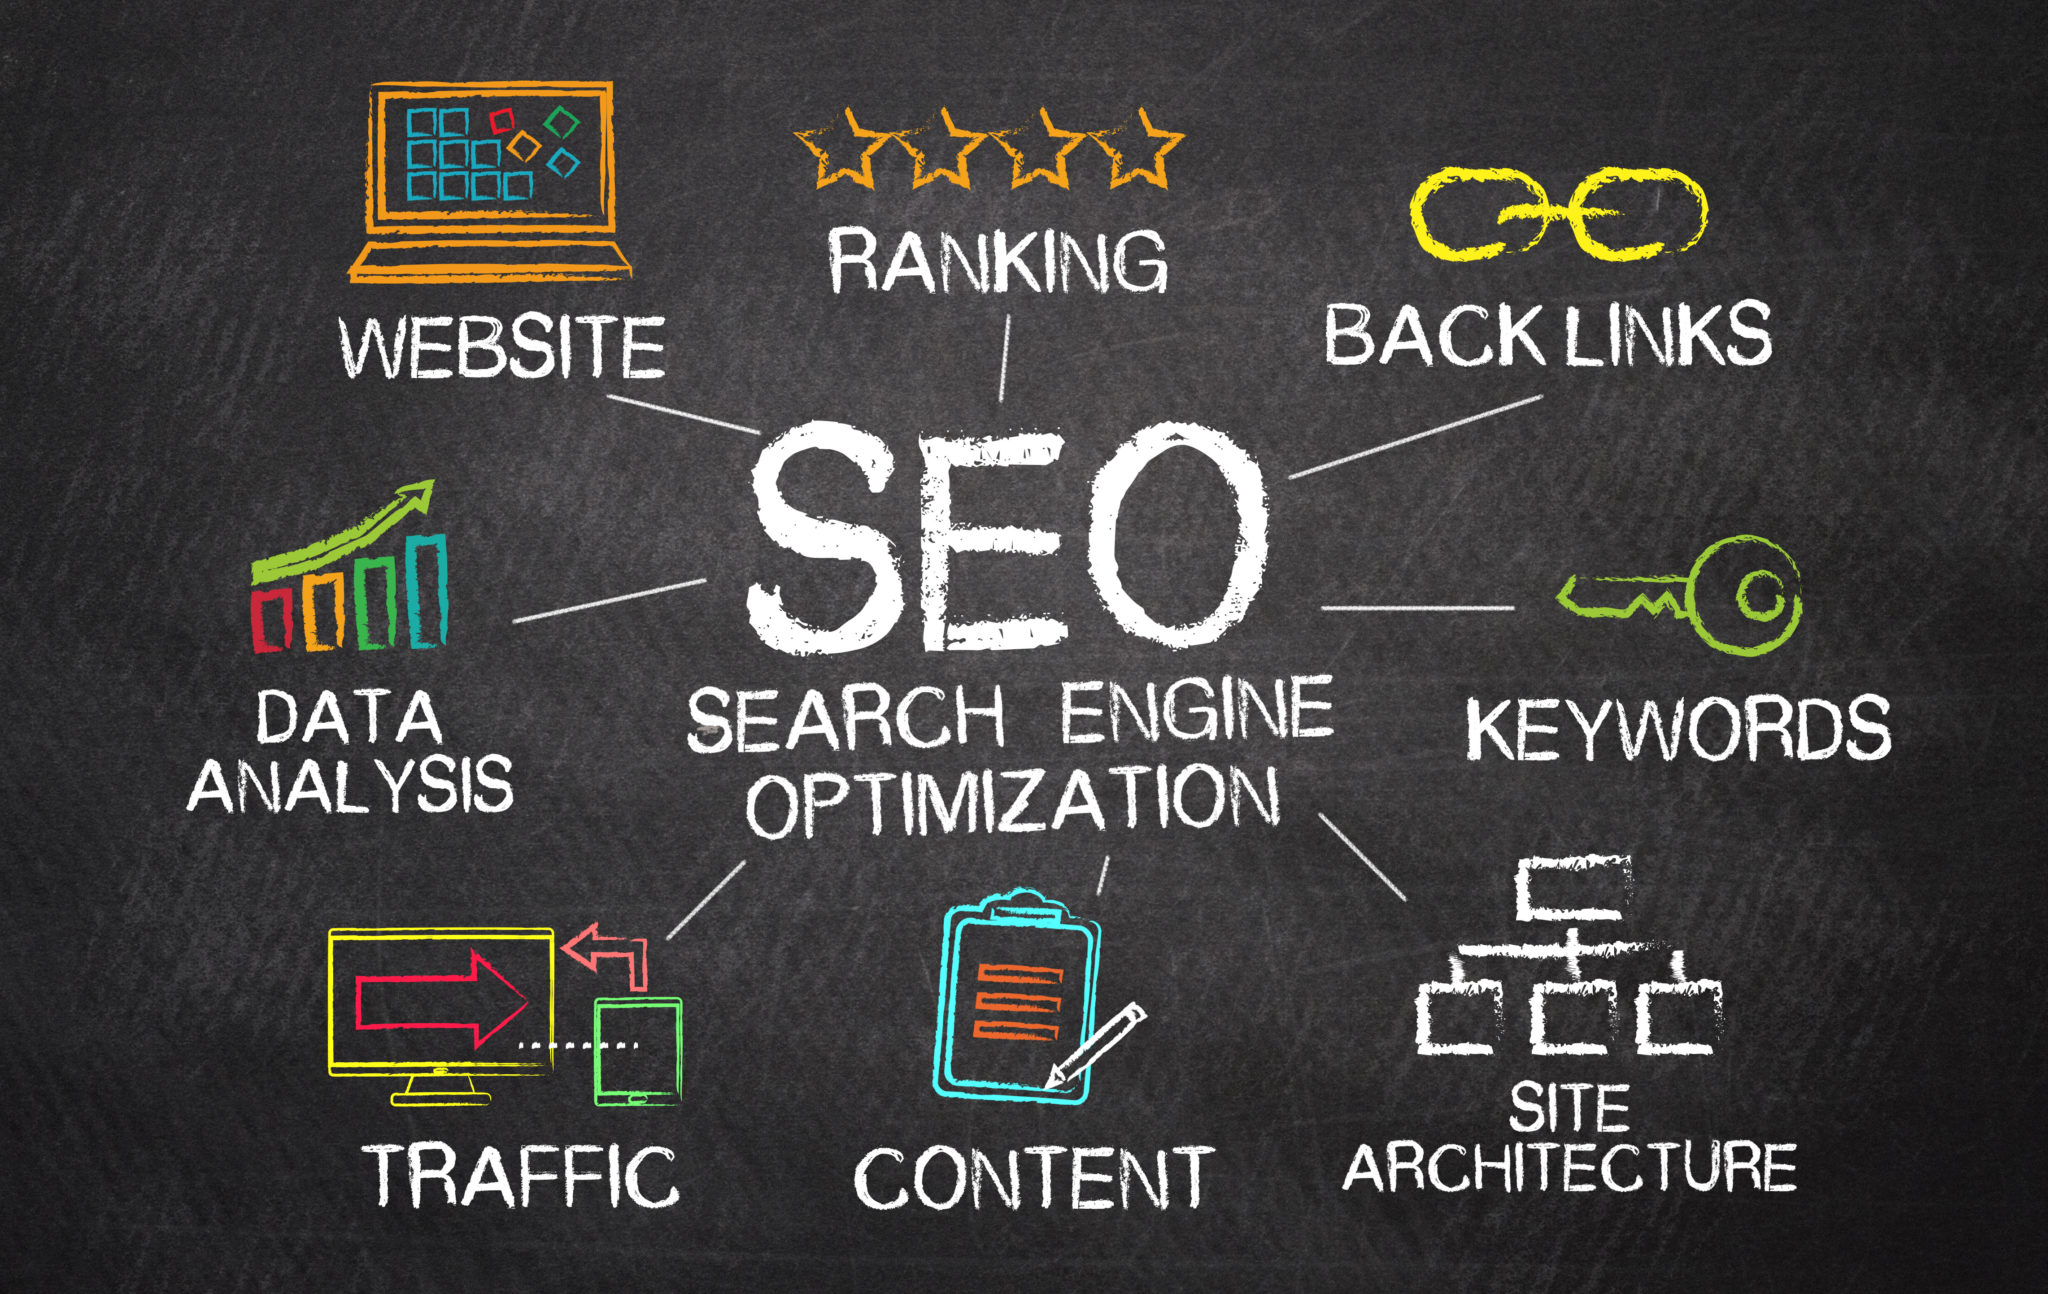 6 SEO Tips to Help Small Businesses Grow - The Zebra-Good News in Alexandria